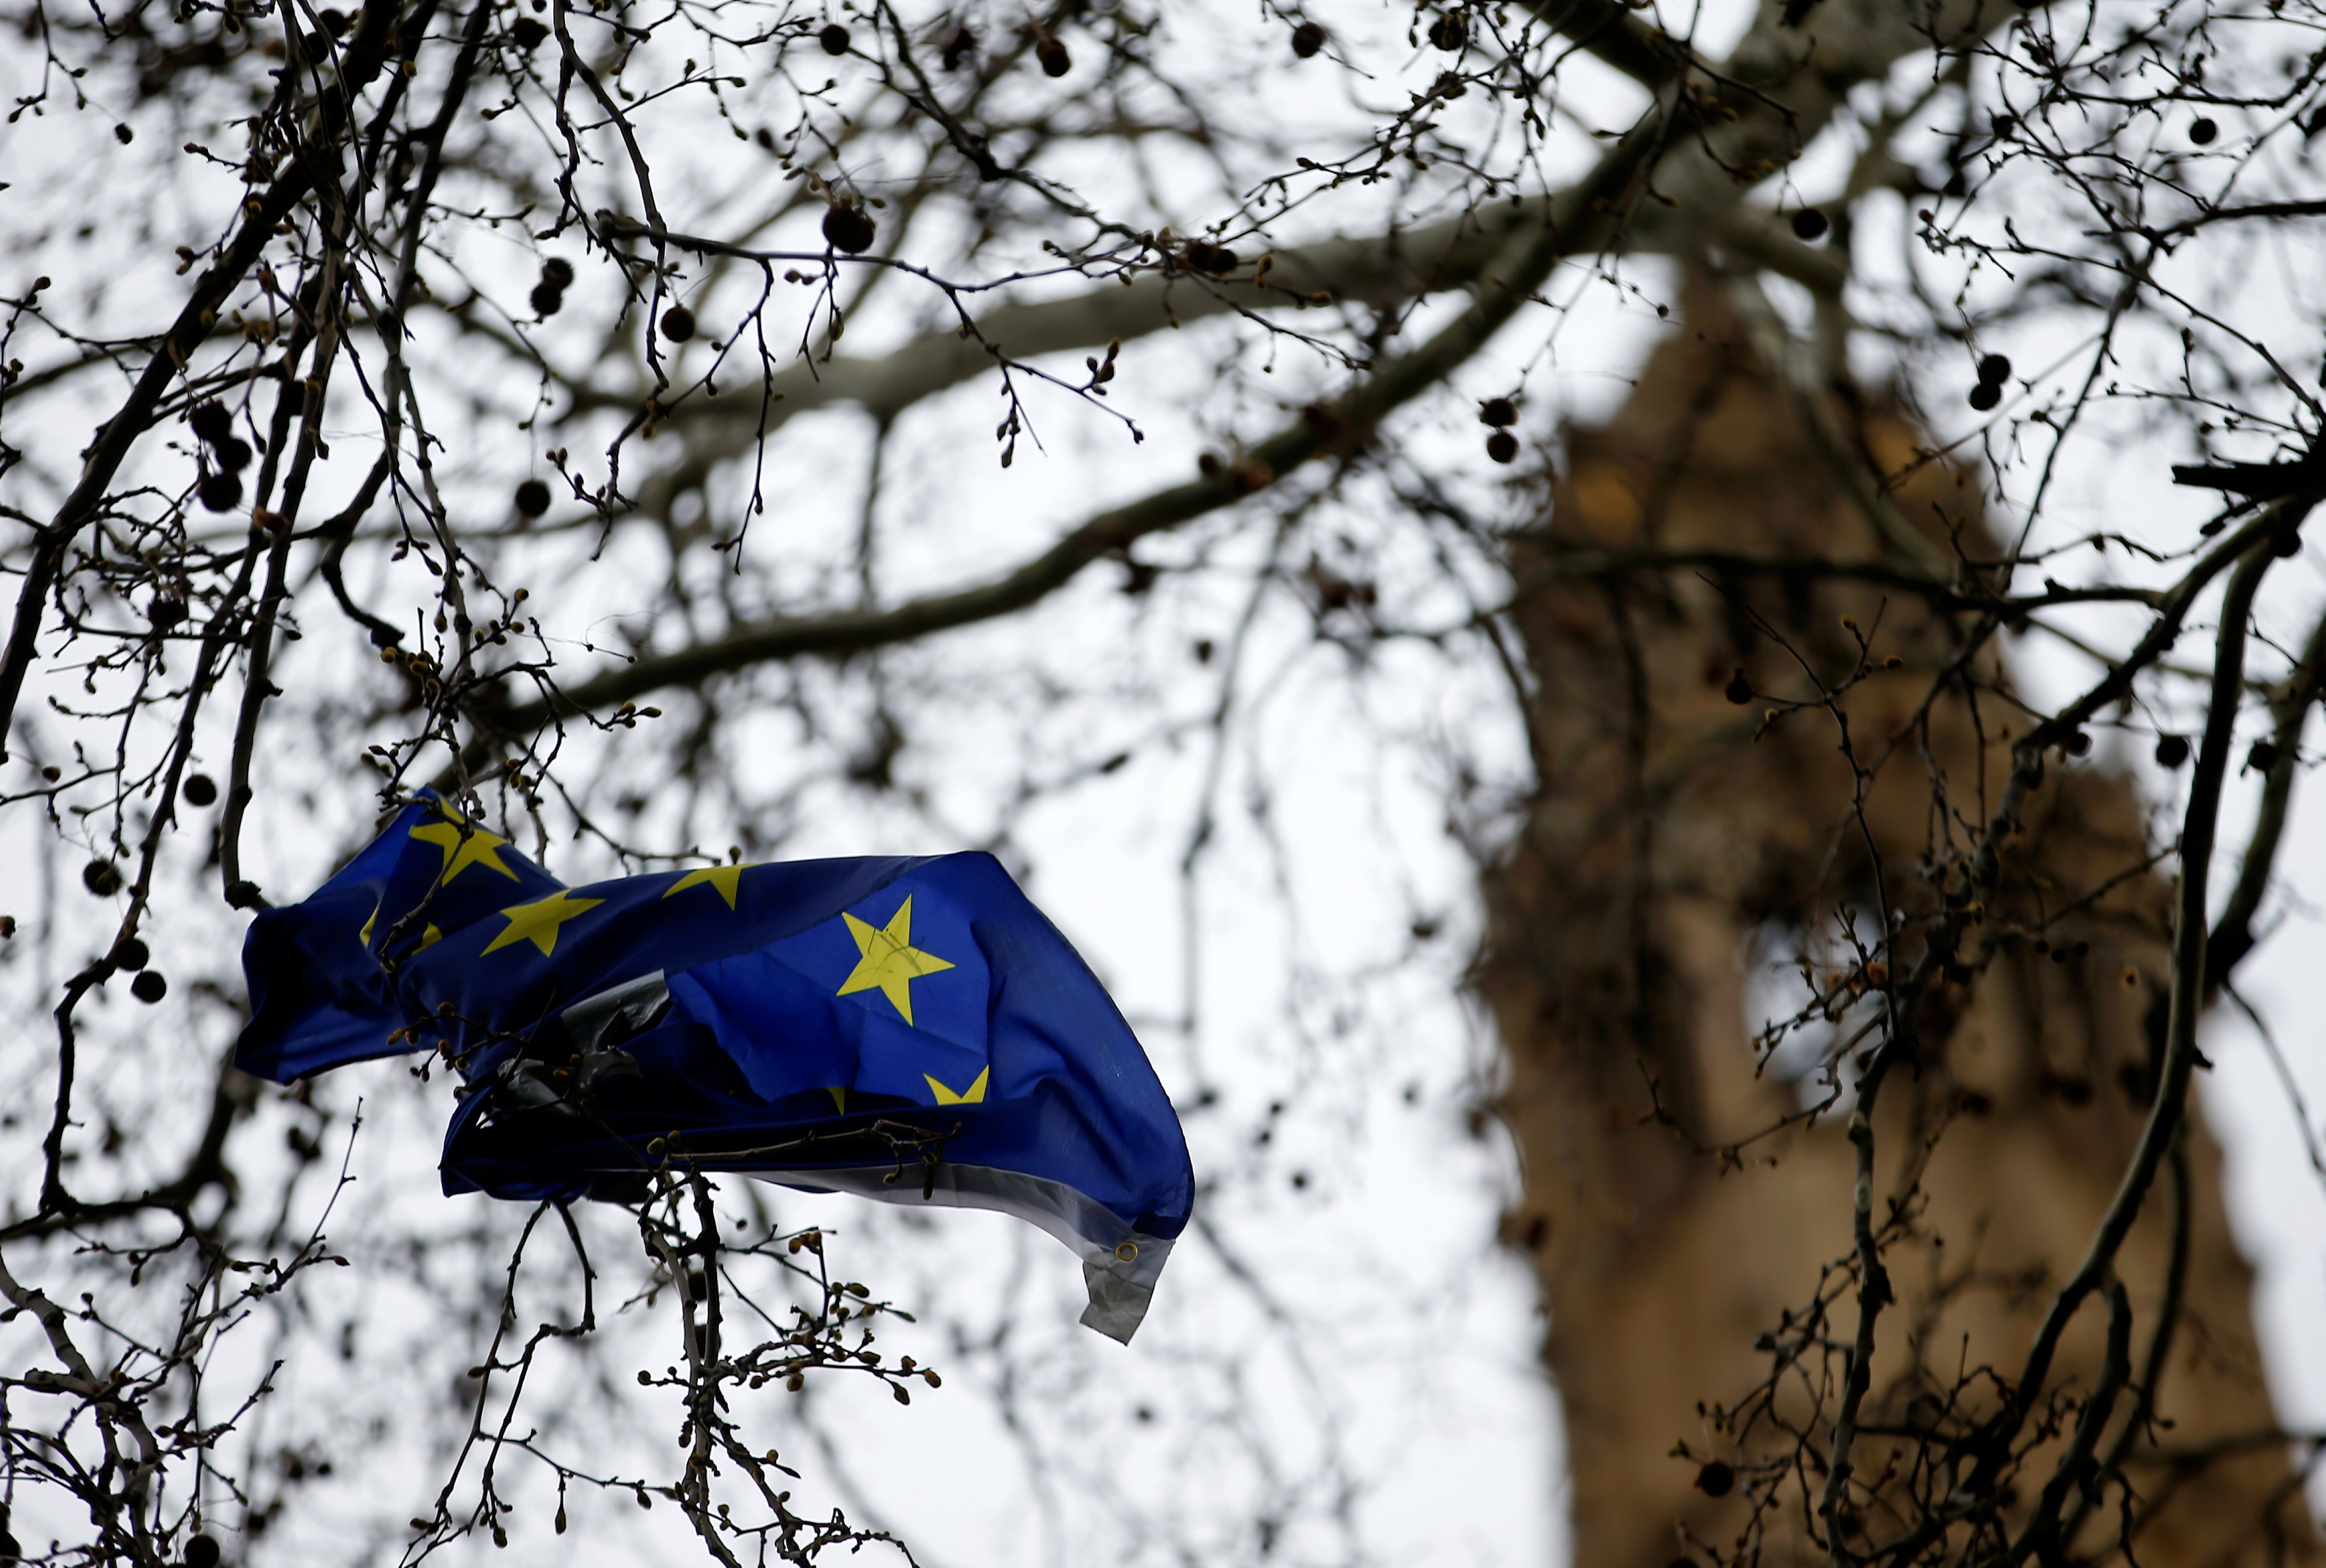 An EU flag is seen stuck in a tree outside the Houses of Parliament in London, Britain March 14, 2019.